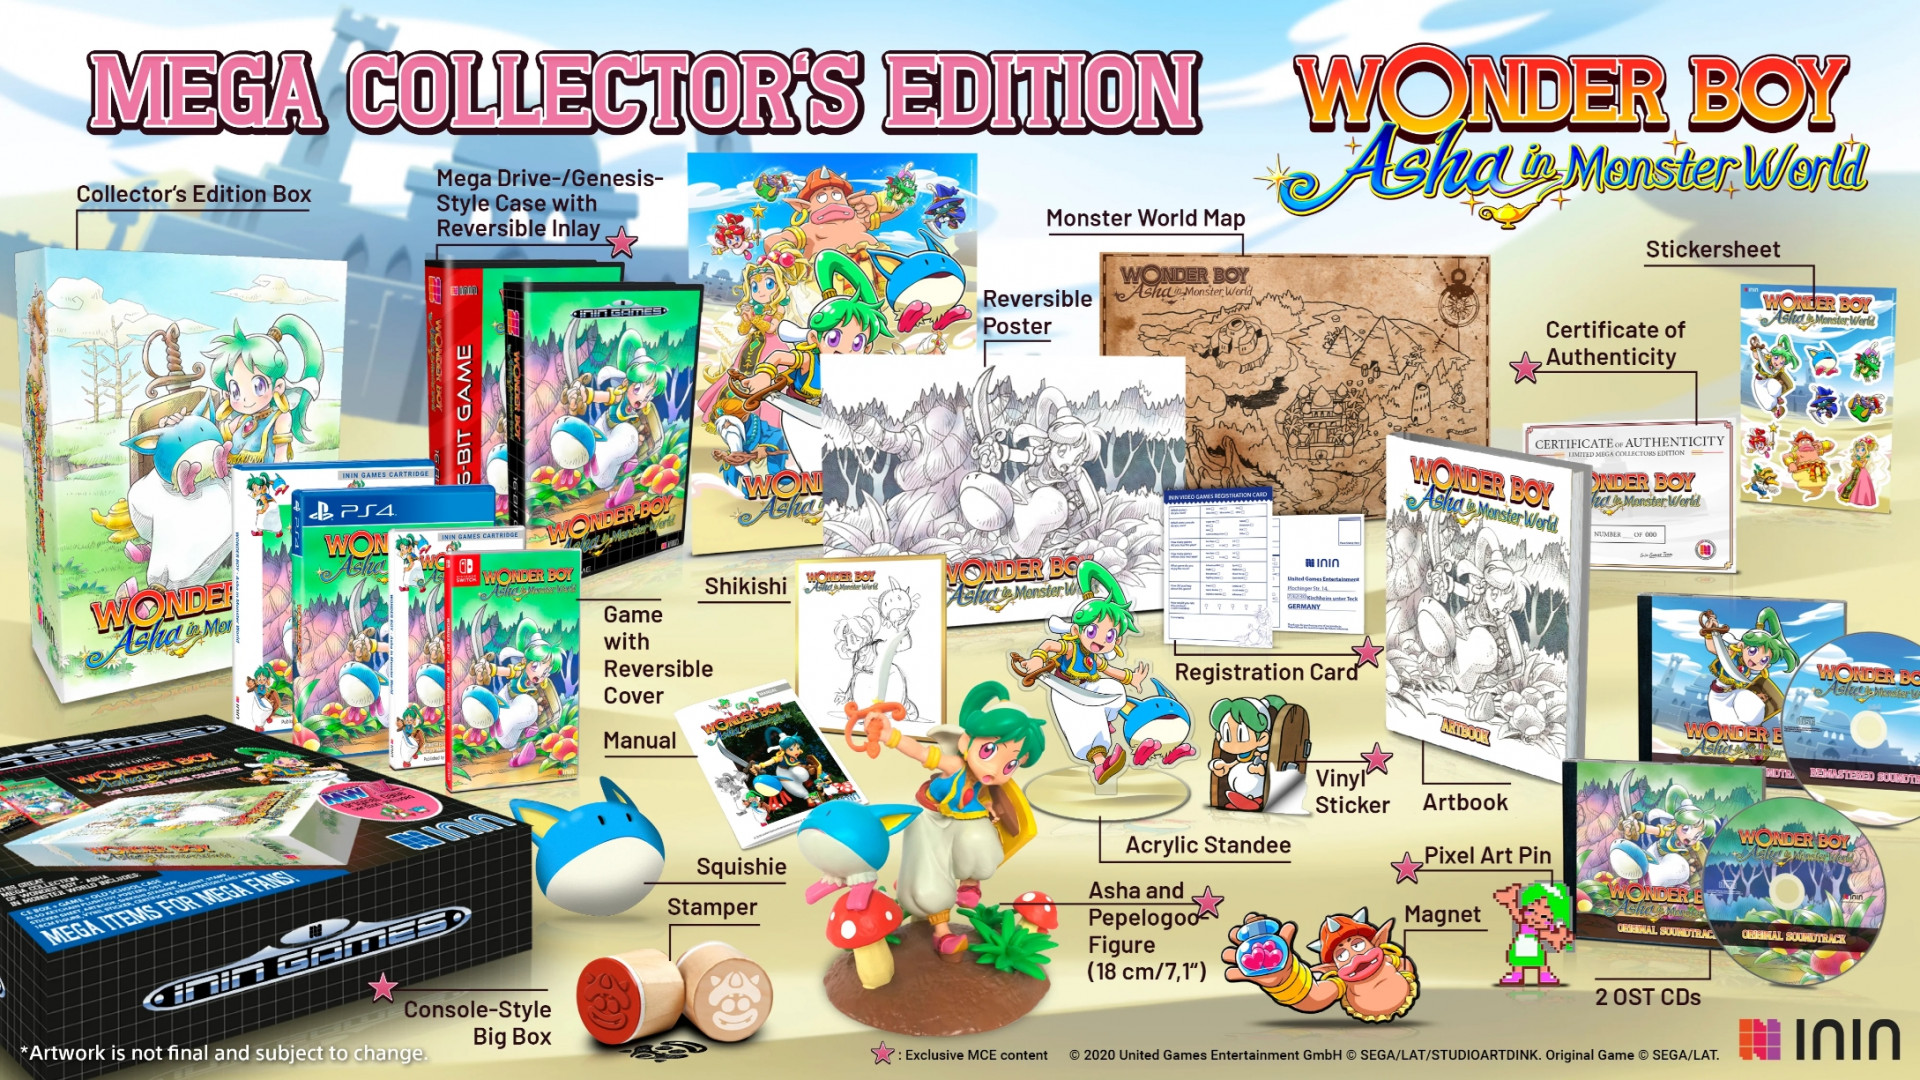 Wonder Boy: Asha in Monster World - Collector's Edition (Strictly Limited) (PS4), ININ Games, Strictly Limited Games